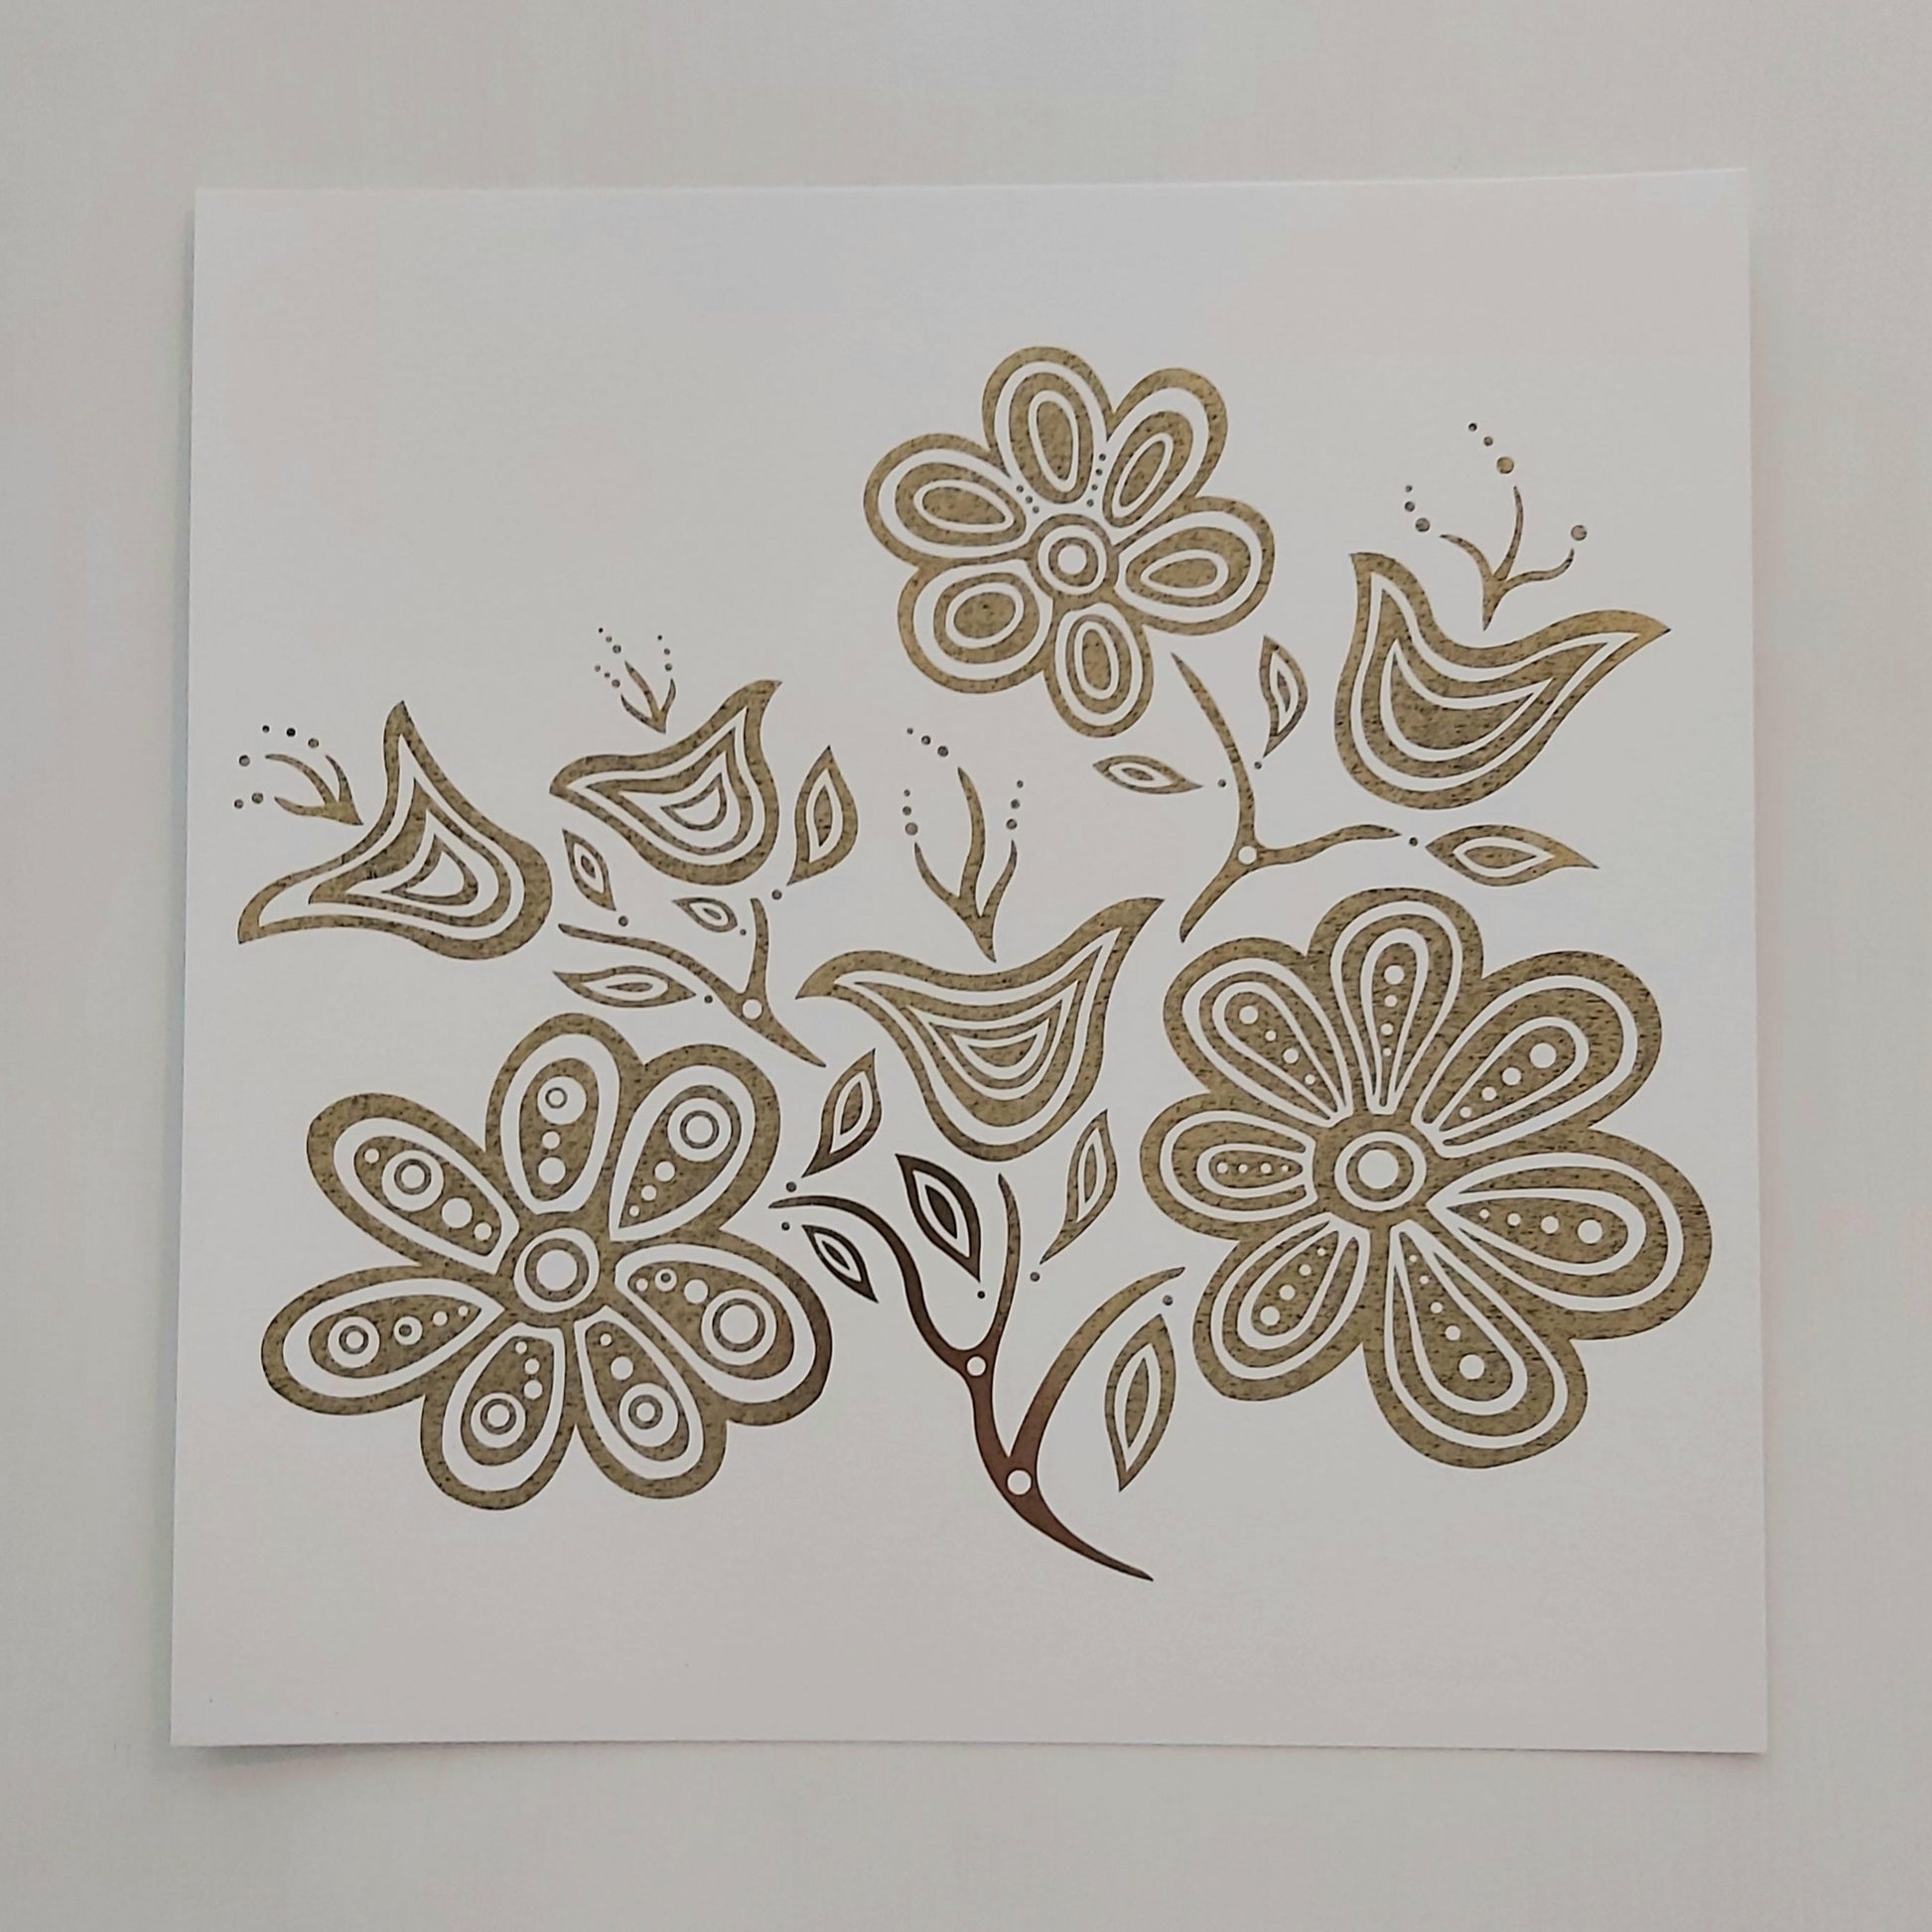 Print of Patrick Hunter's painting of flowers, gold leaf on white, woodland art style.